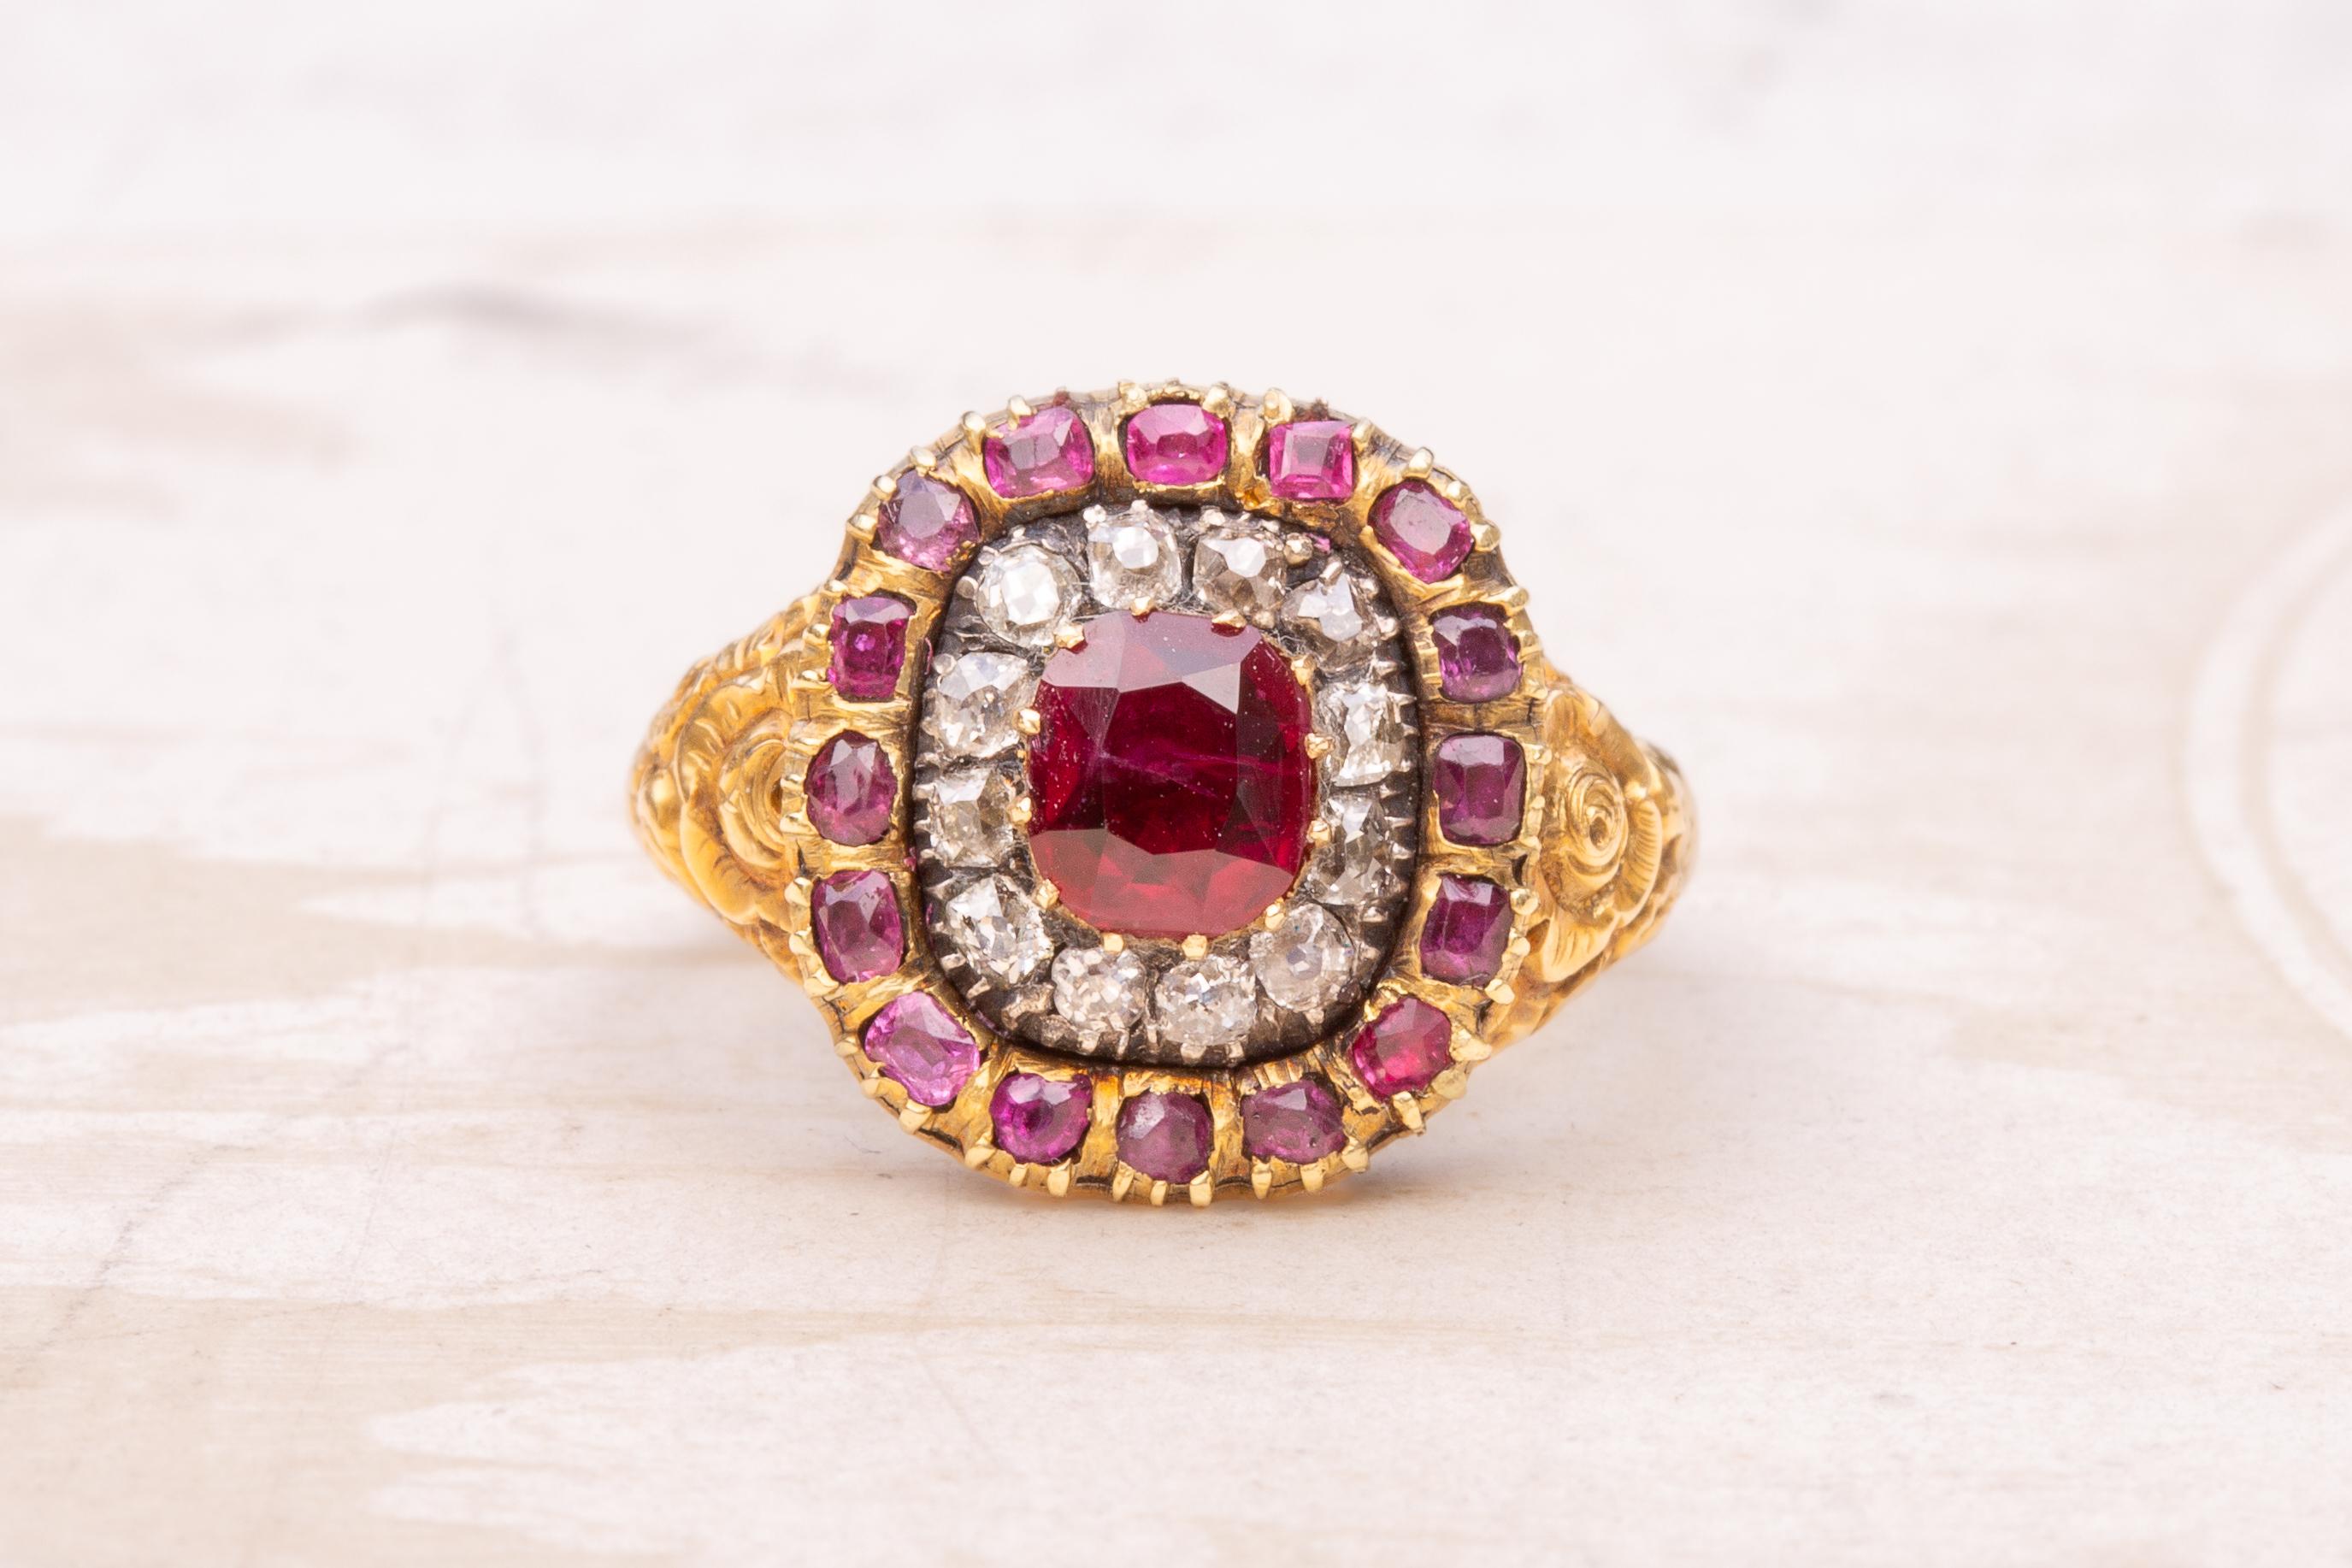 A superb antique Georgian ruby and diamond ring made in England, circa 1820. The centre of this ‘target’ shaped cluster ring is set with a 1ct cushion cut deep red ‘pigeon’s blood’ ruby, probably Burmese origin. Neatly prong-set, it is encircled by